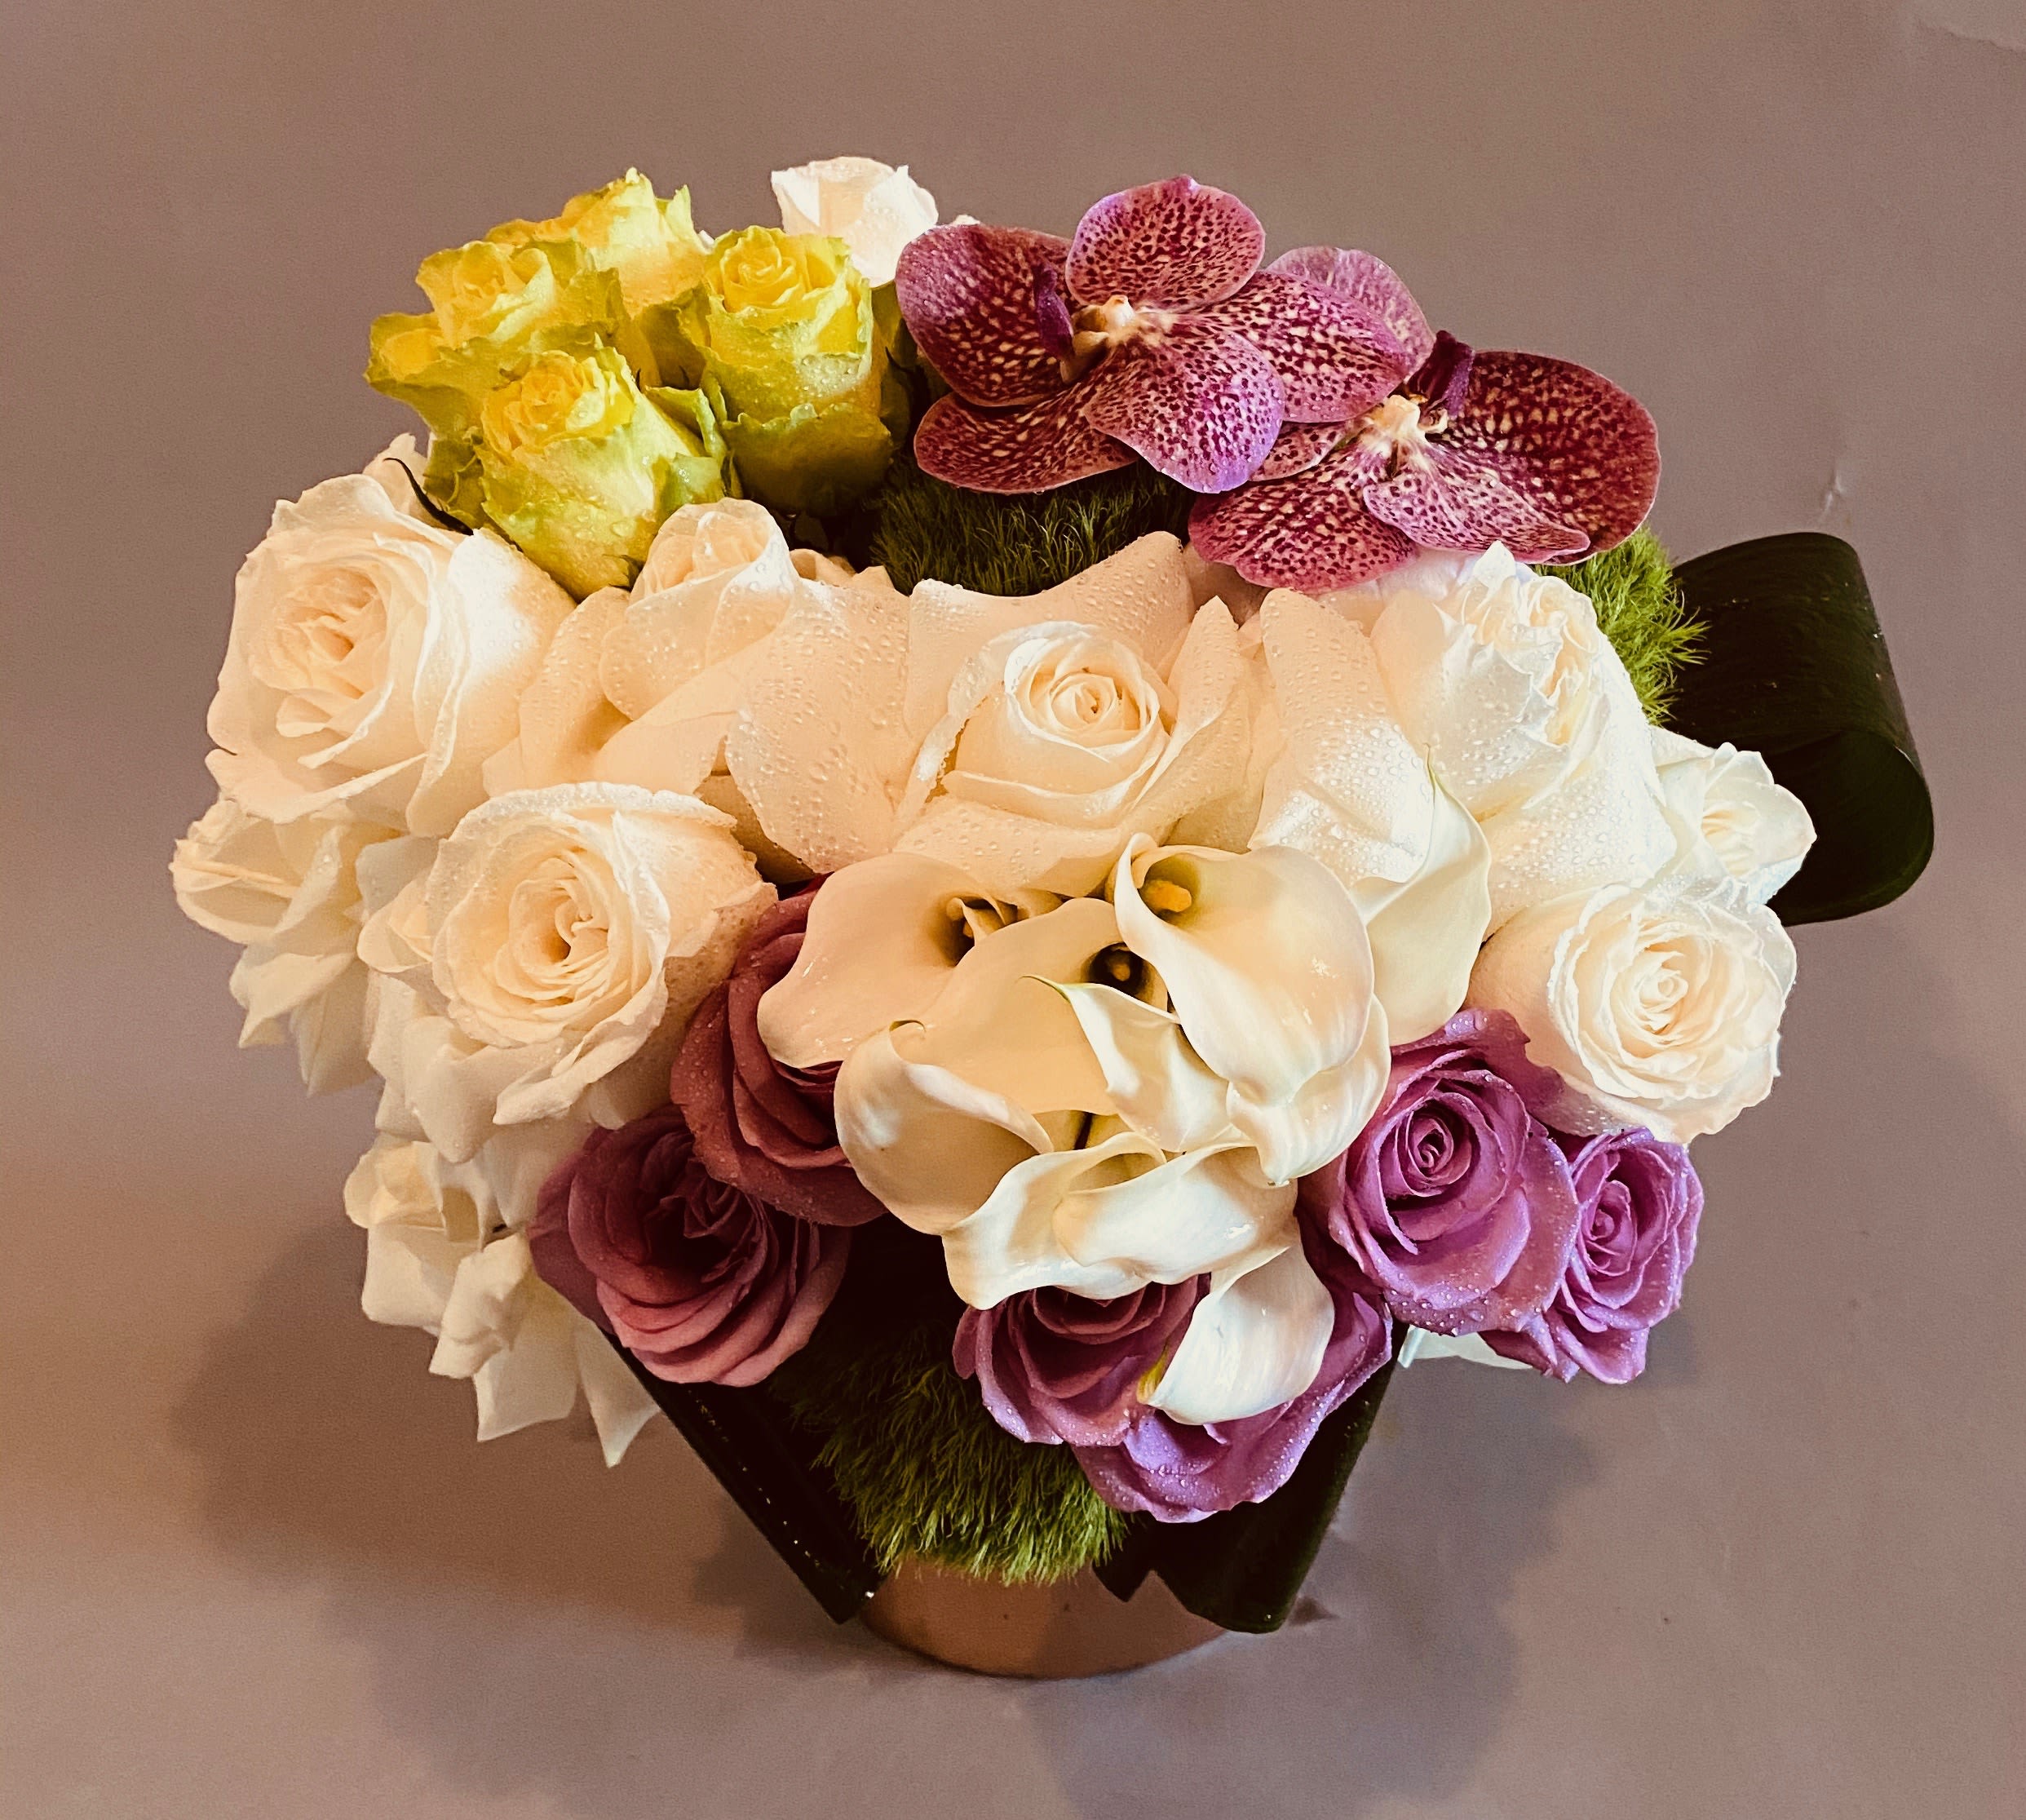 Summer Time - A modern arrangement of calla lillies, roses, and 